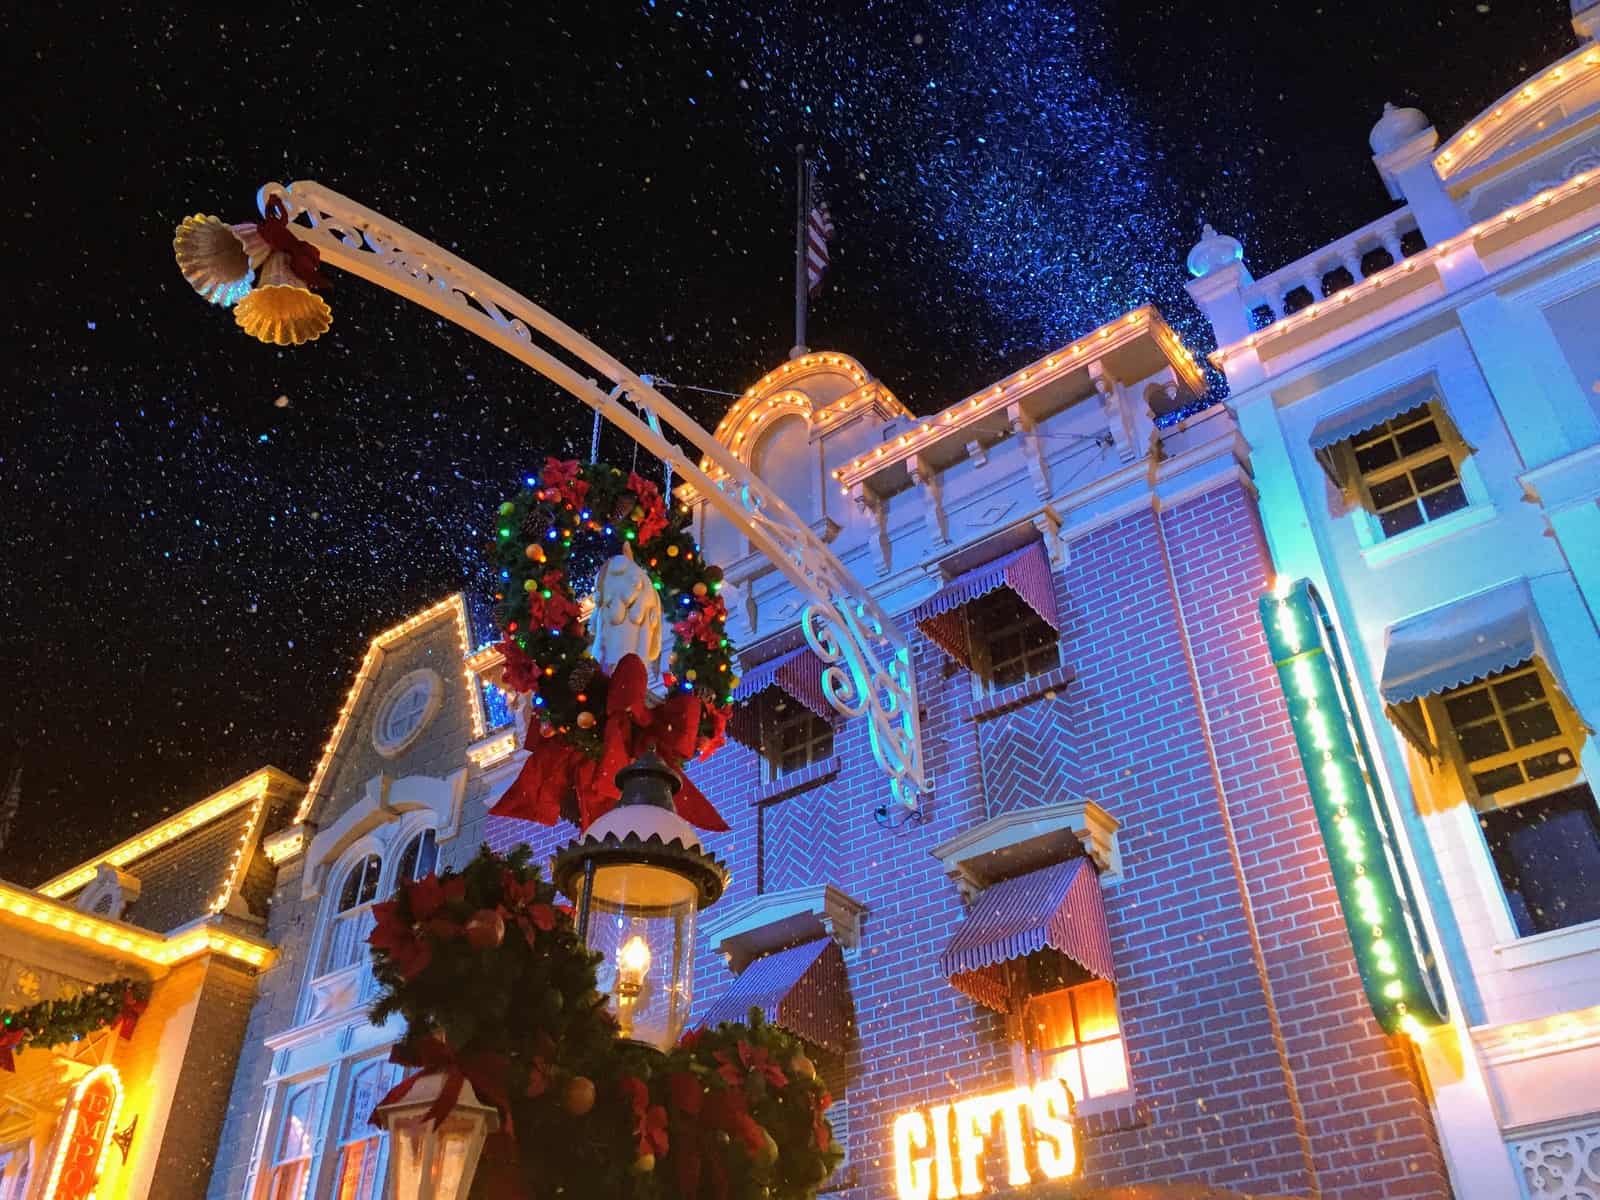 How to see both the Magic Kingdom Halloween and Christmas parties in 1 trip